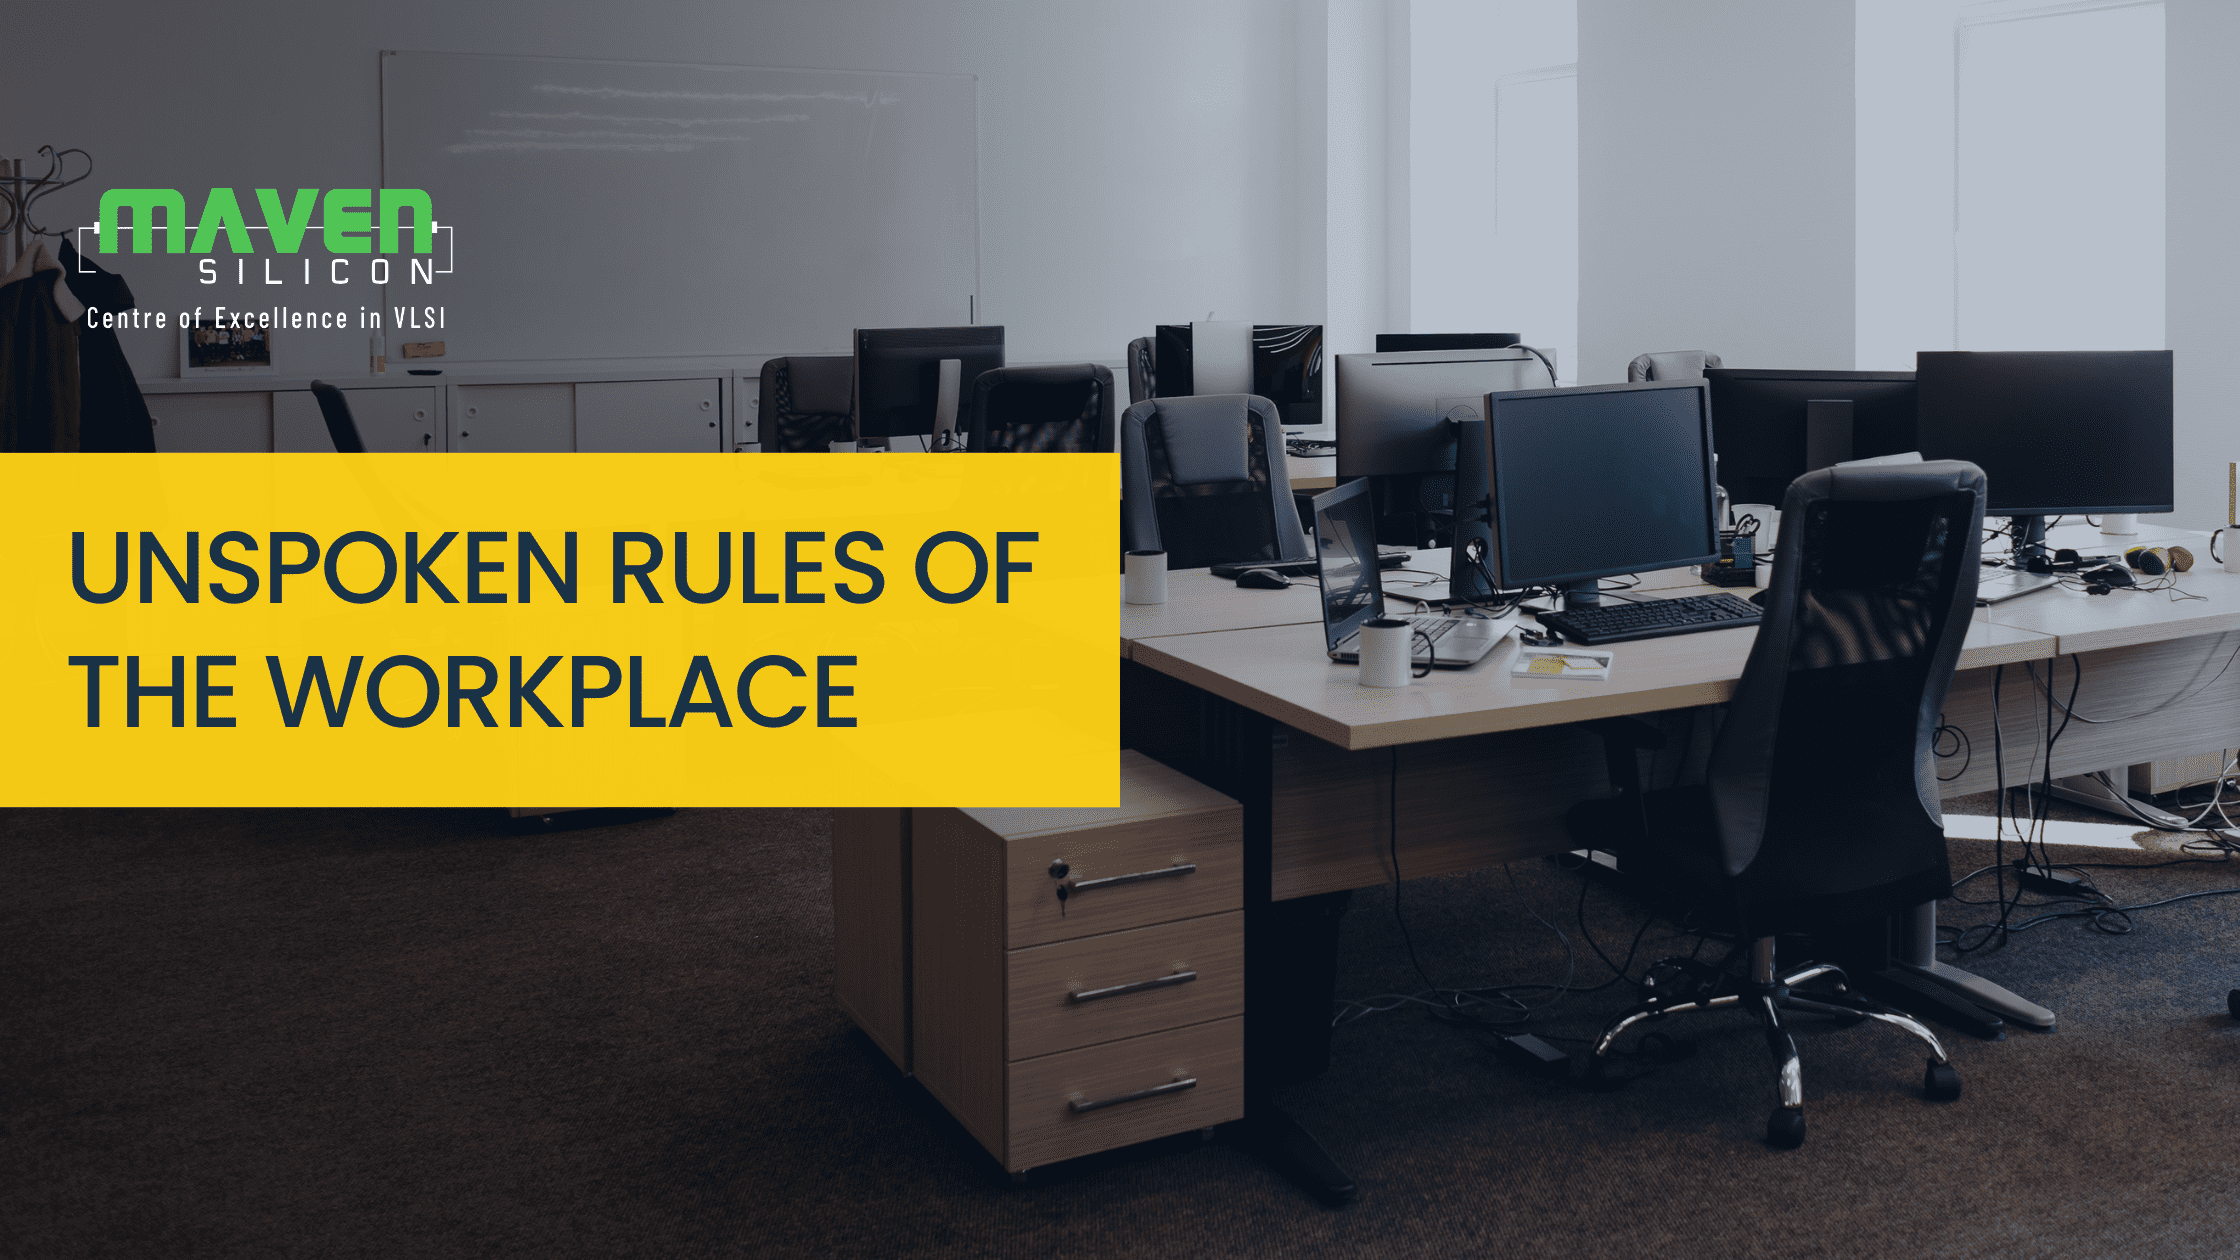 Unspoken Rules of the Workplace